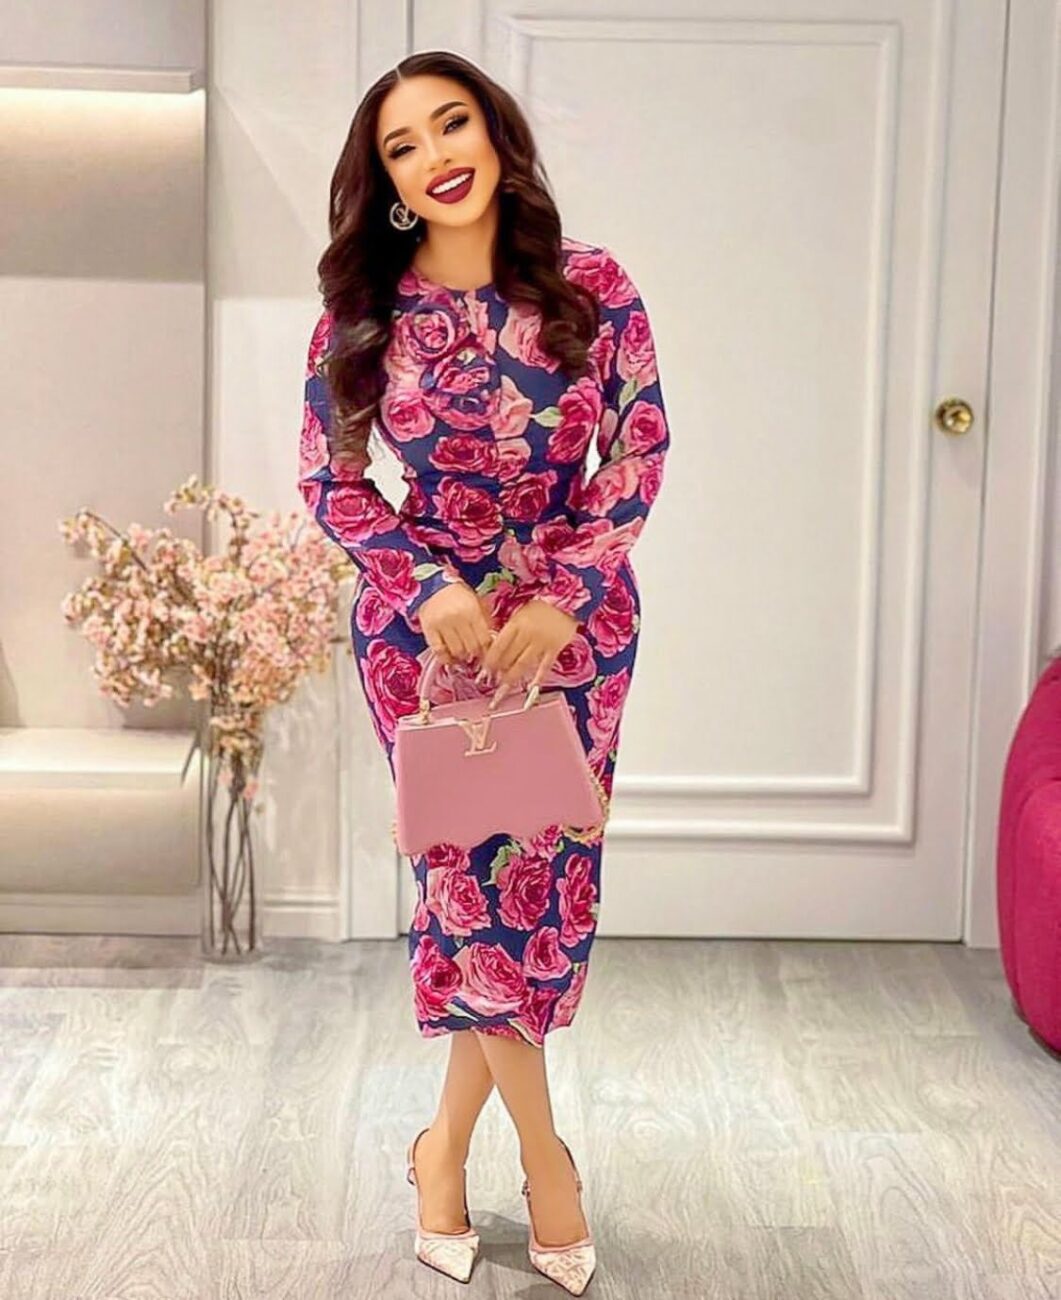 Tonto Dikeh in a simple floral dress.